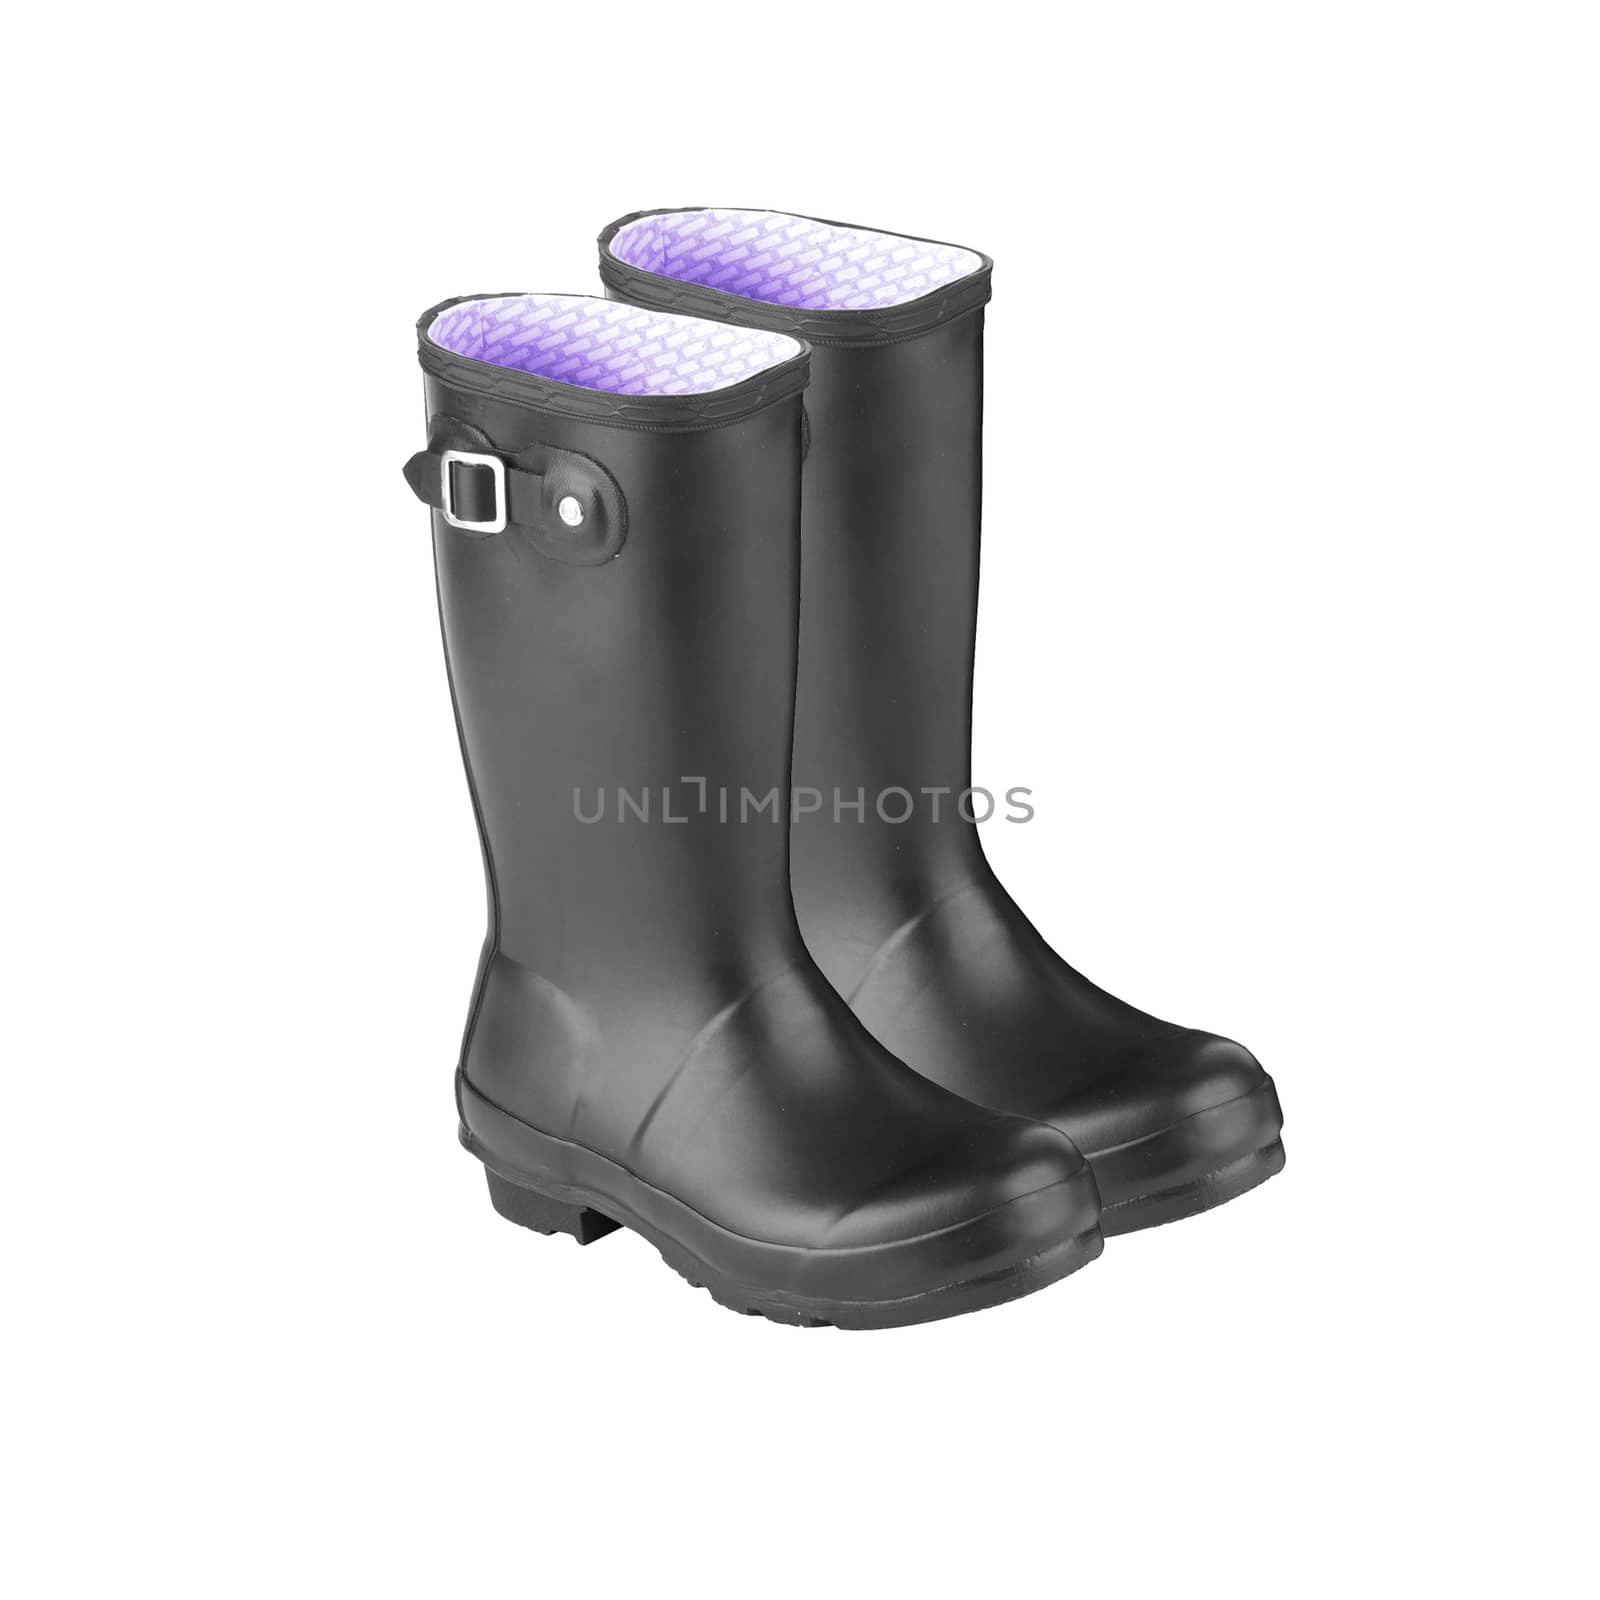 Gum Boot isolated against a white background by ozaiachin